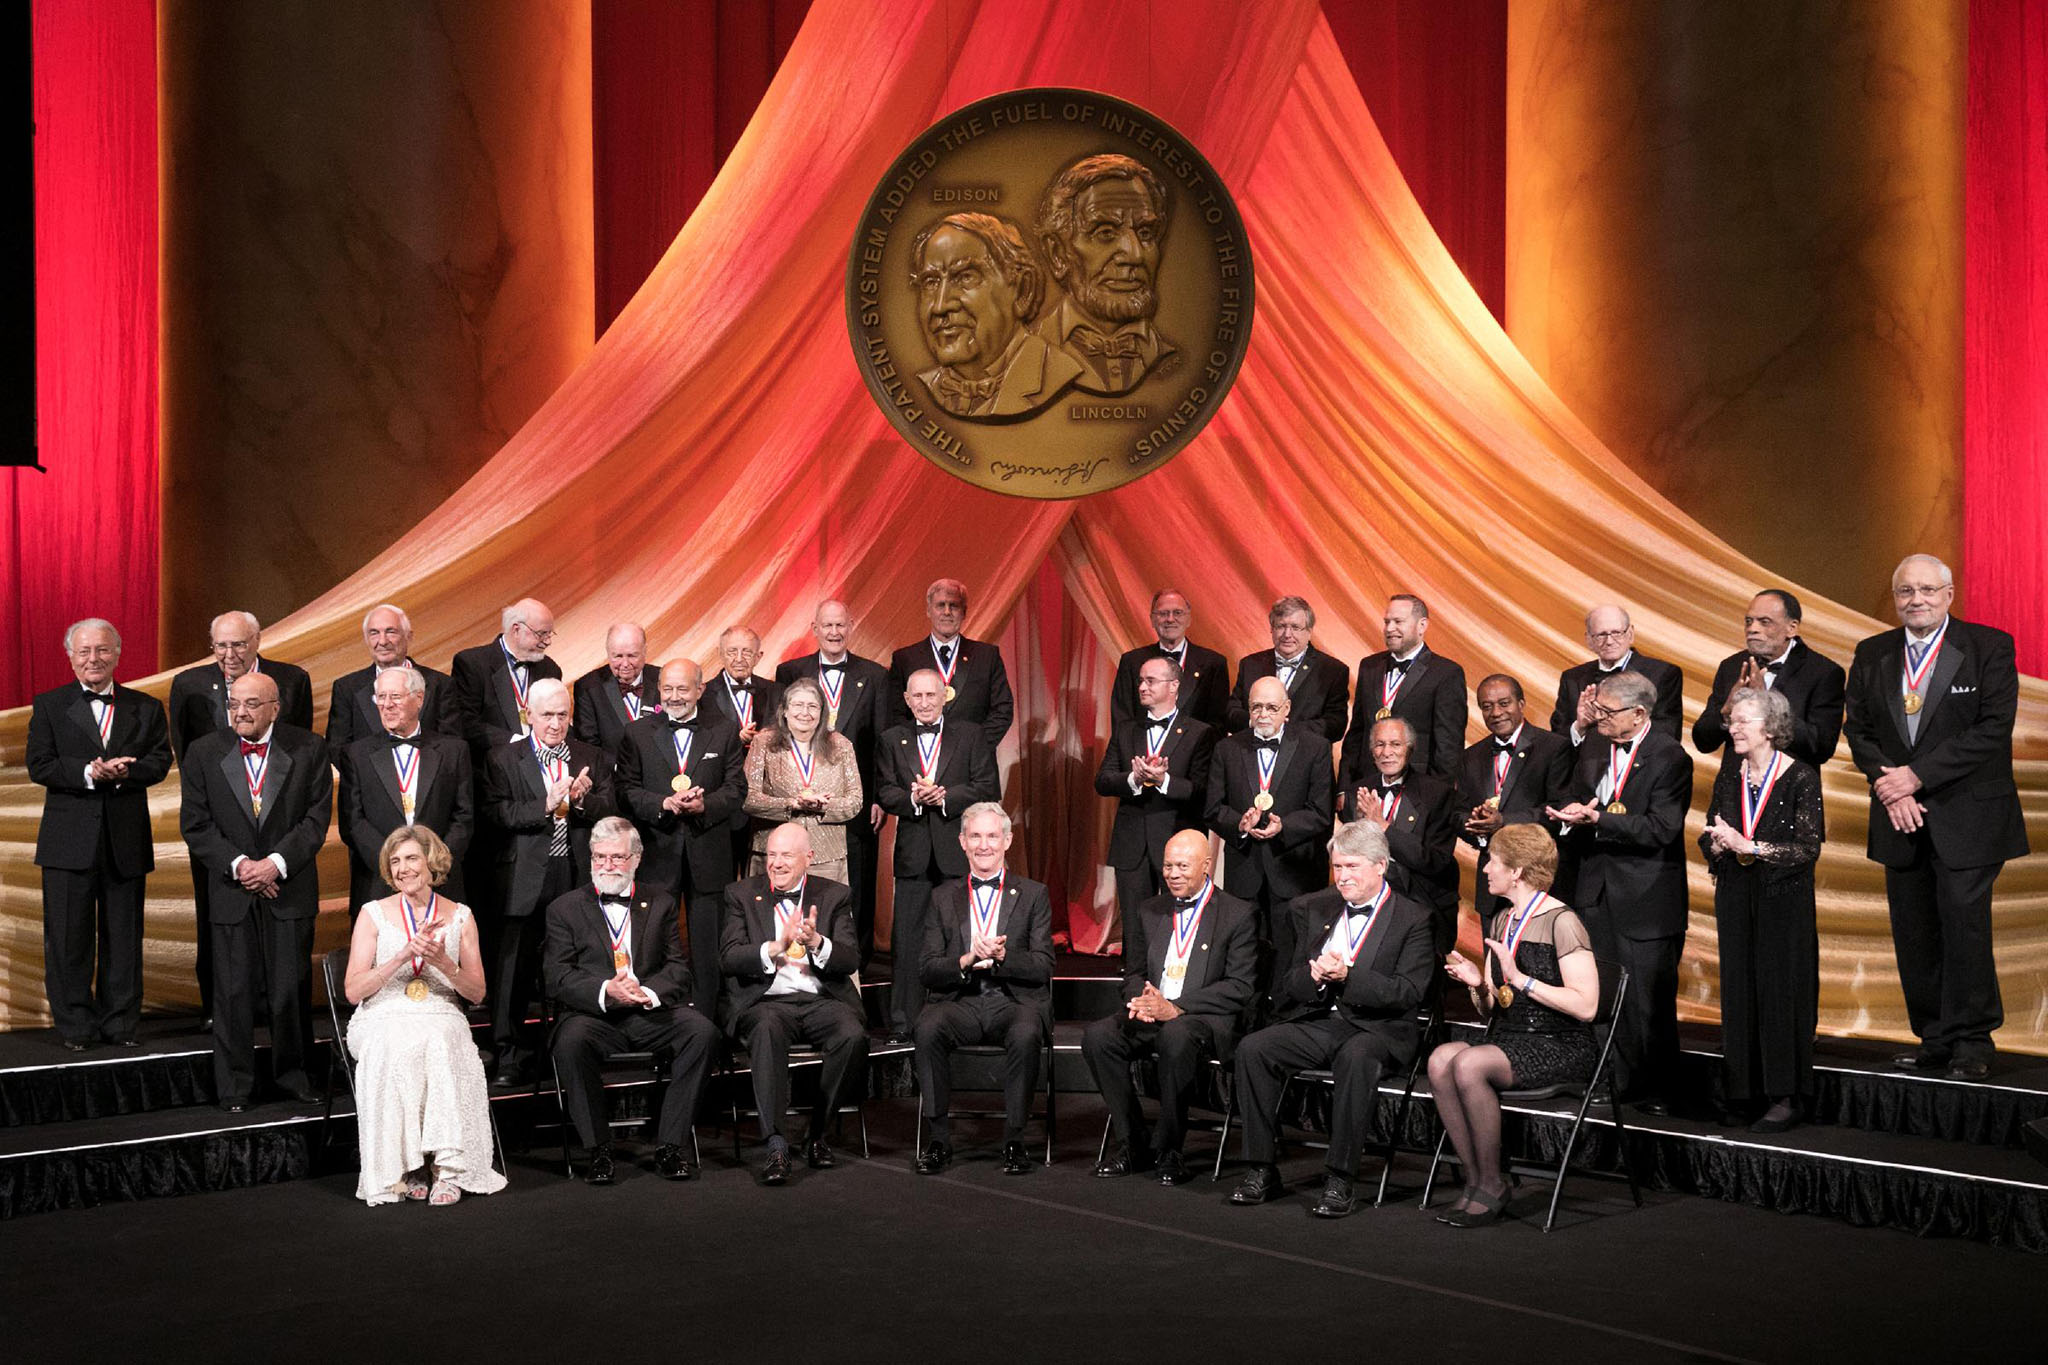 2017 National Inventors Hall of Fame inductees